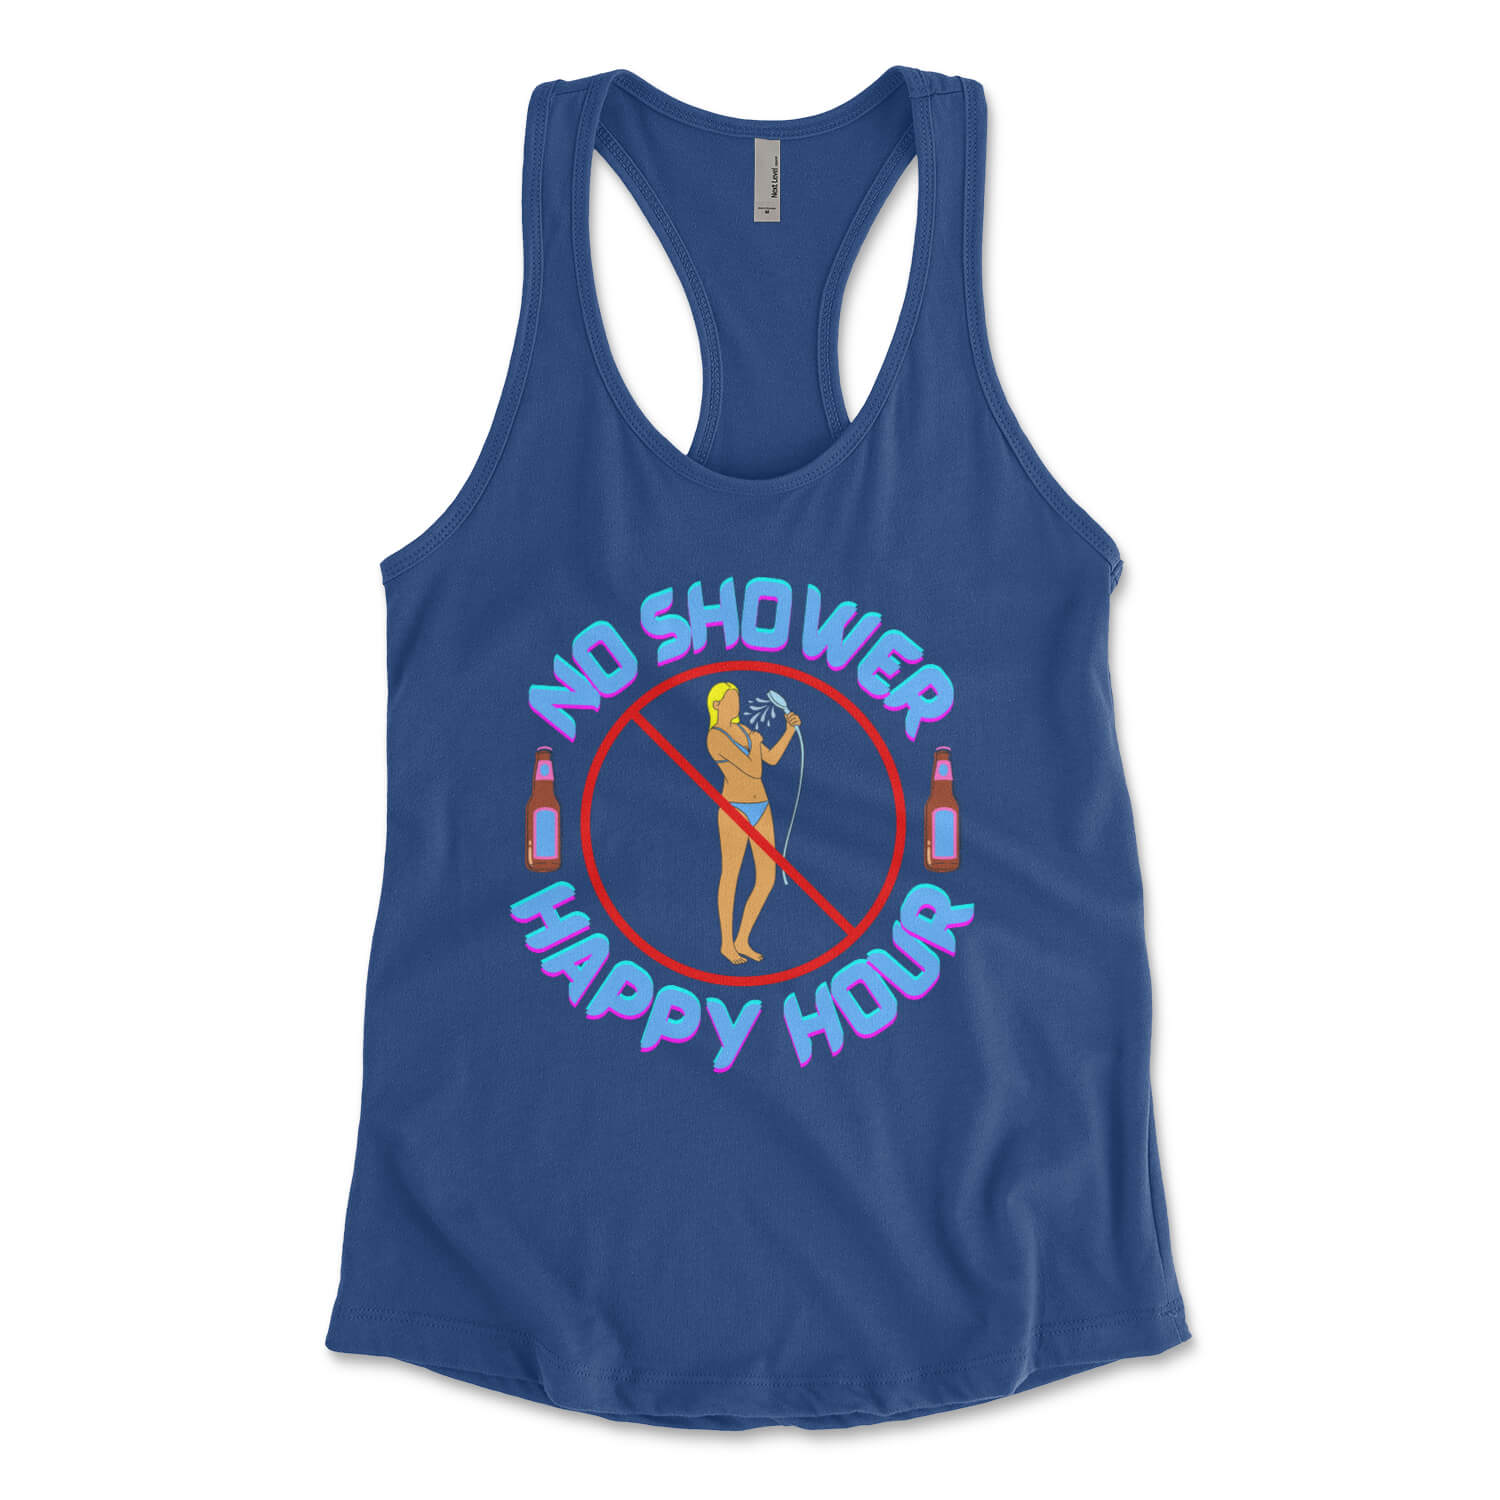 No shower happy hour sea isle city new jersey royal blue womens tank top Phillygoat